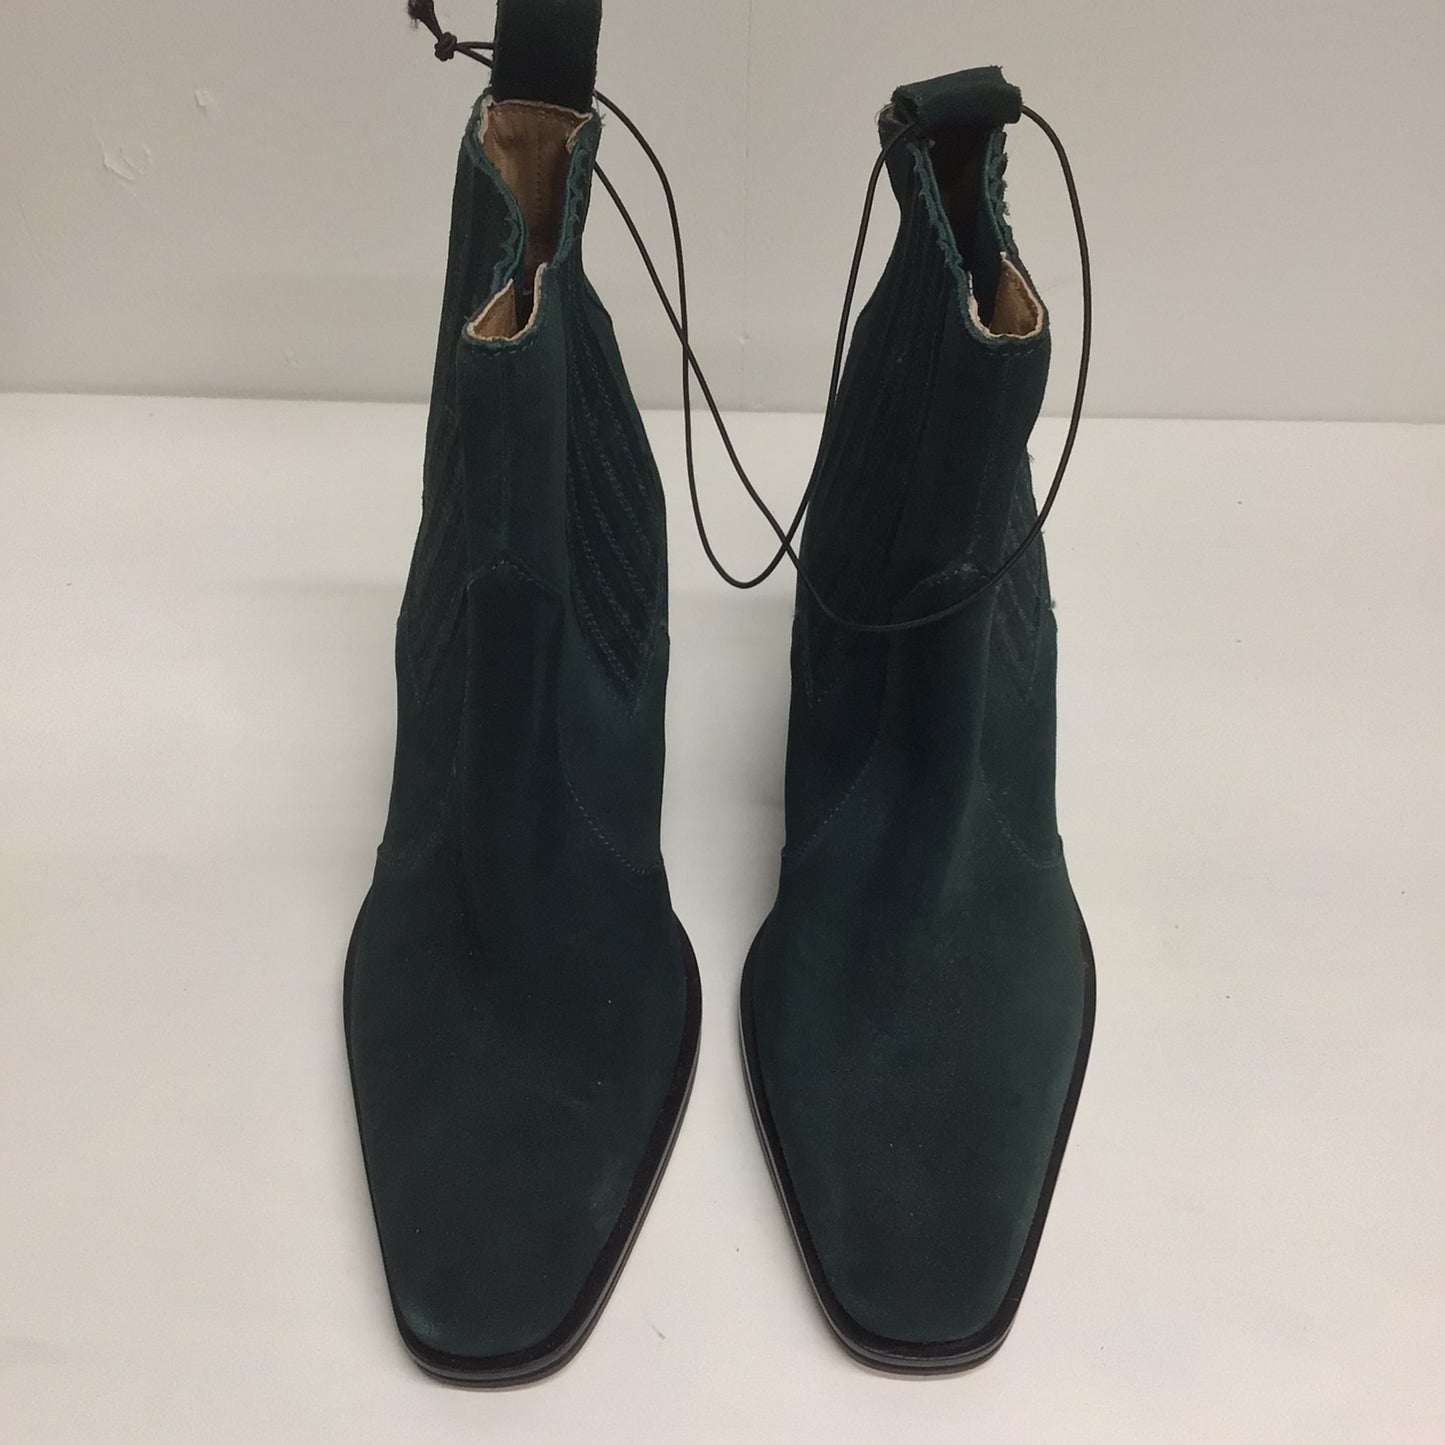 BNWT M&S Jade Green High Ankle Cowboy Style Boots Size 5 UK